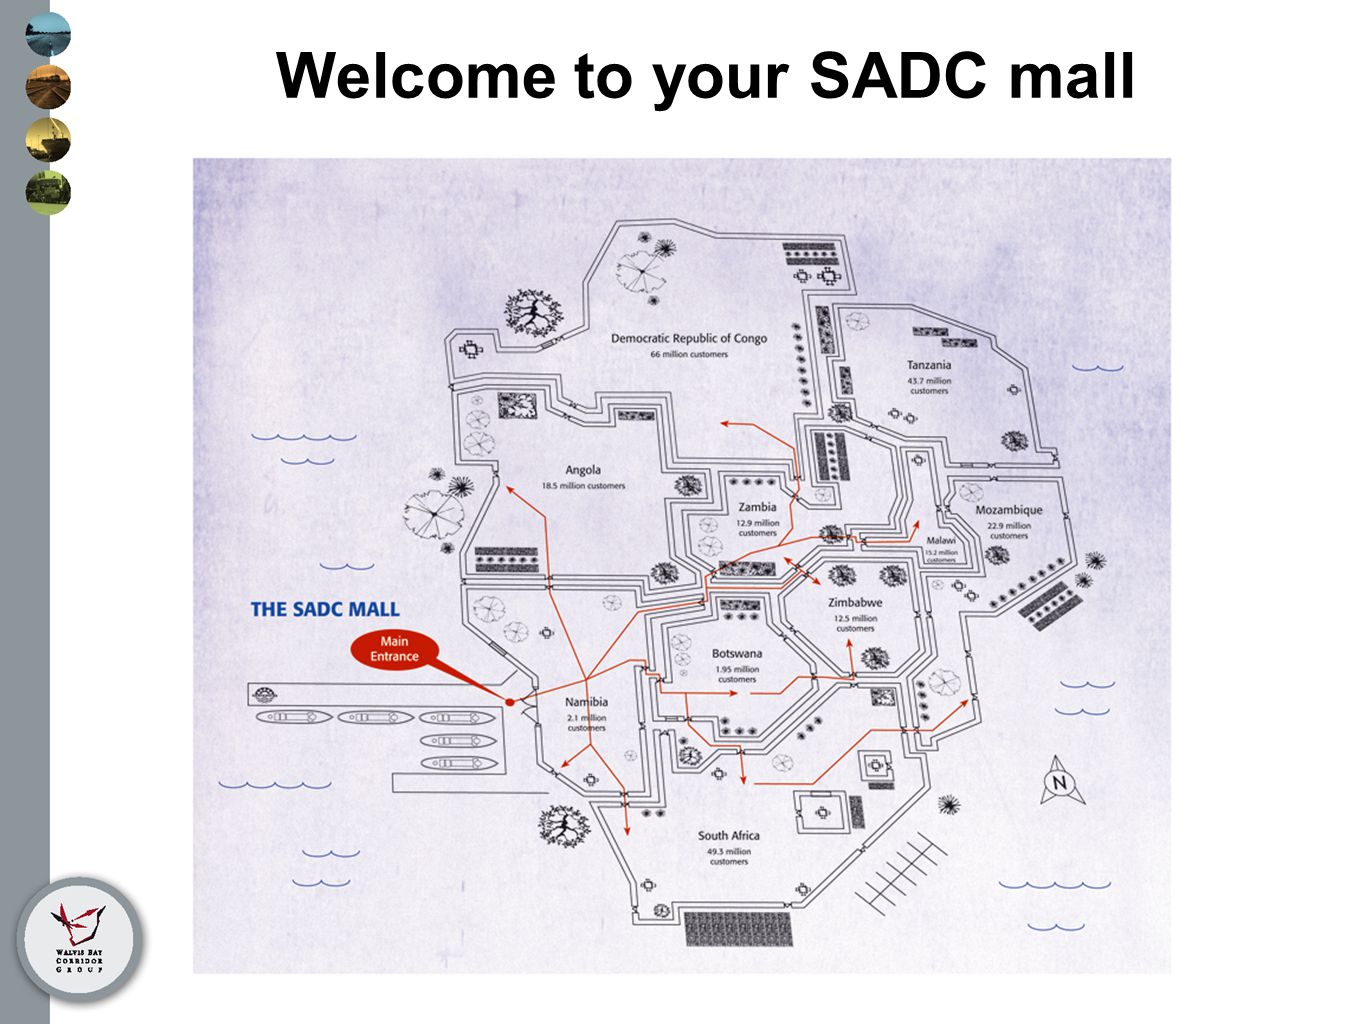 Welcome to your SADC mall